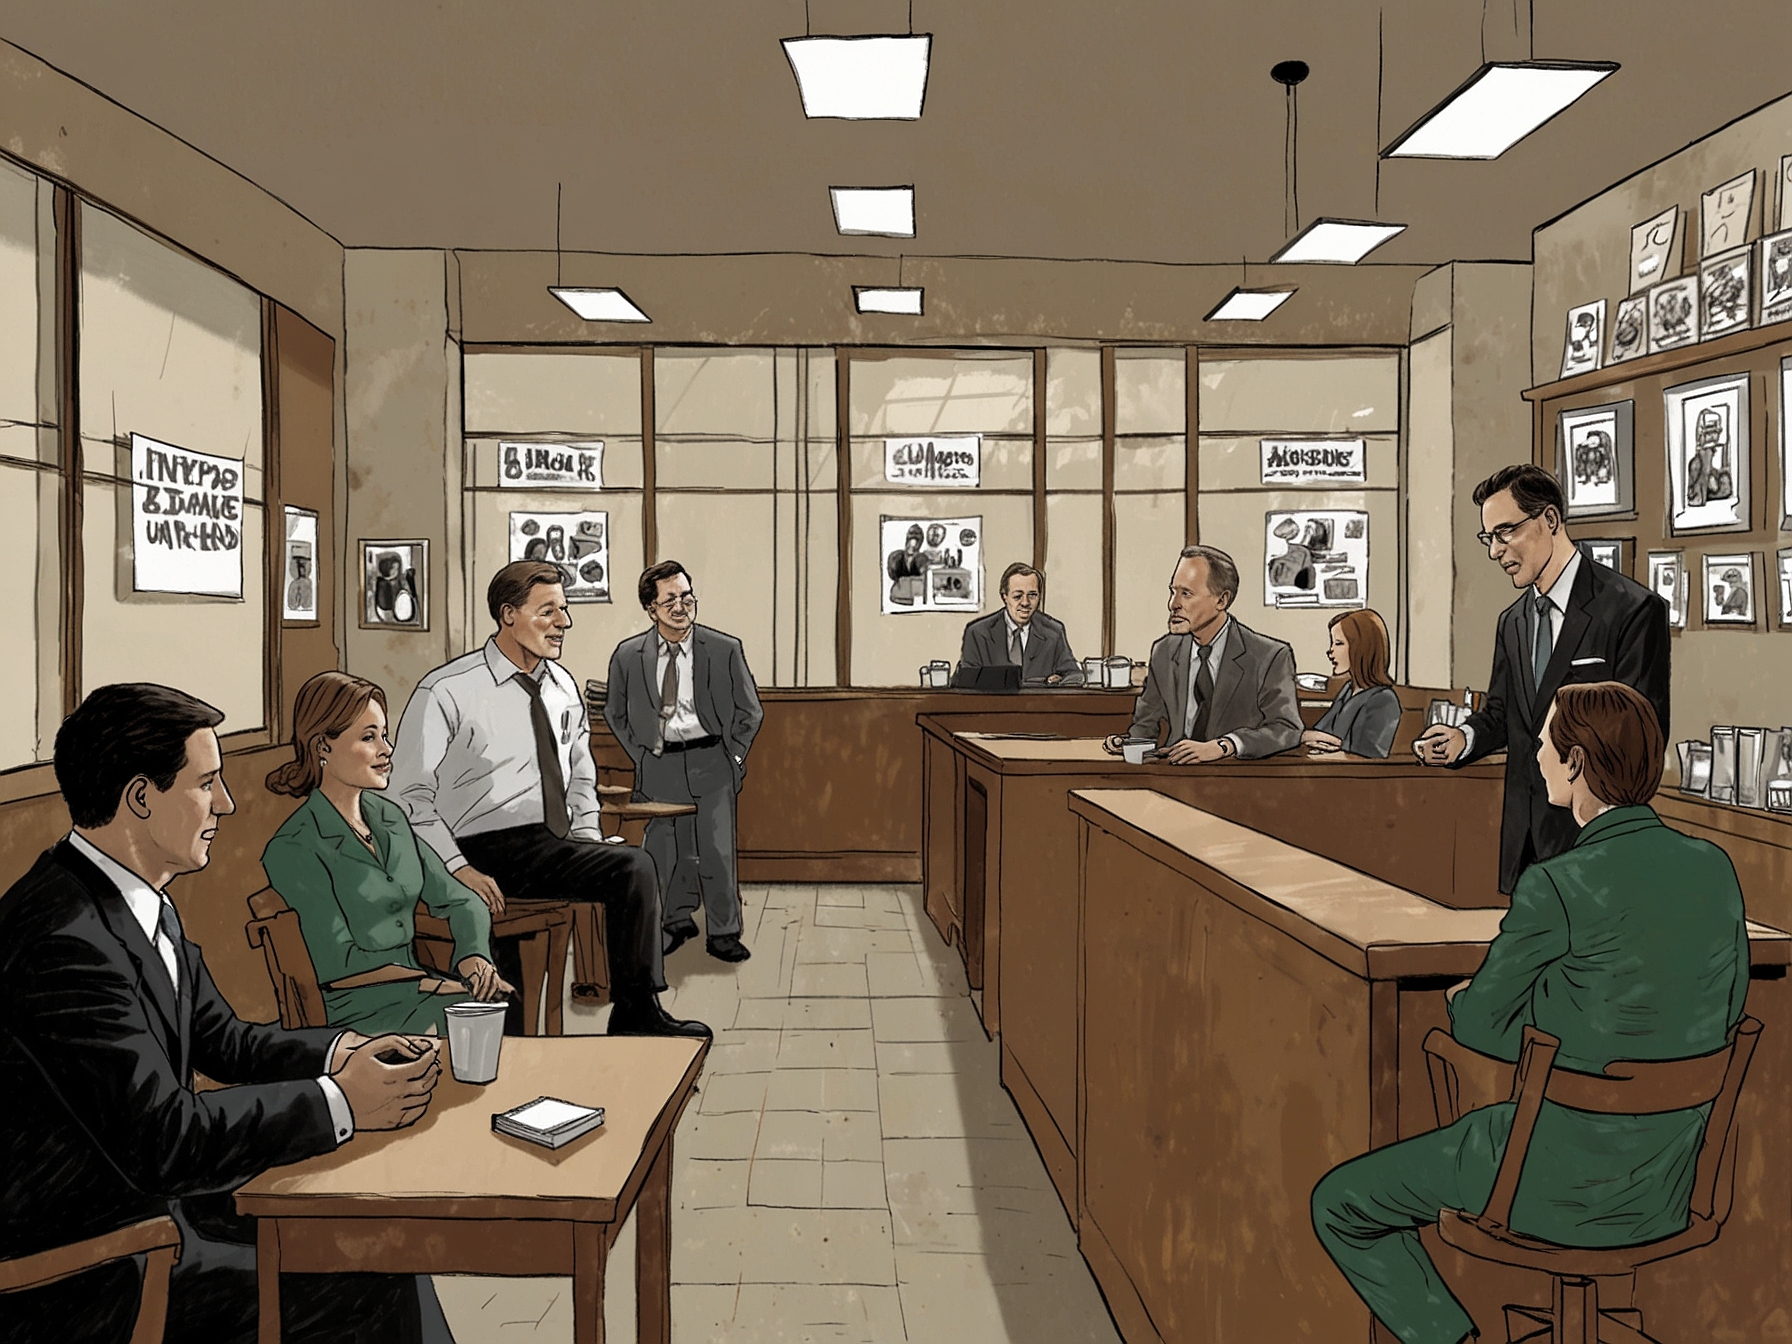 Illustration depicting the drastic leadership overhaul at Starbucks in 2008, showing Schultz implementing Jobs's advice to rejuvenate the company's strategic direction and culture.